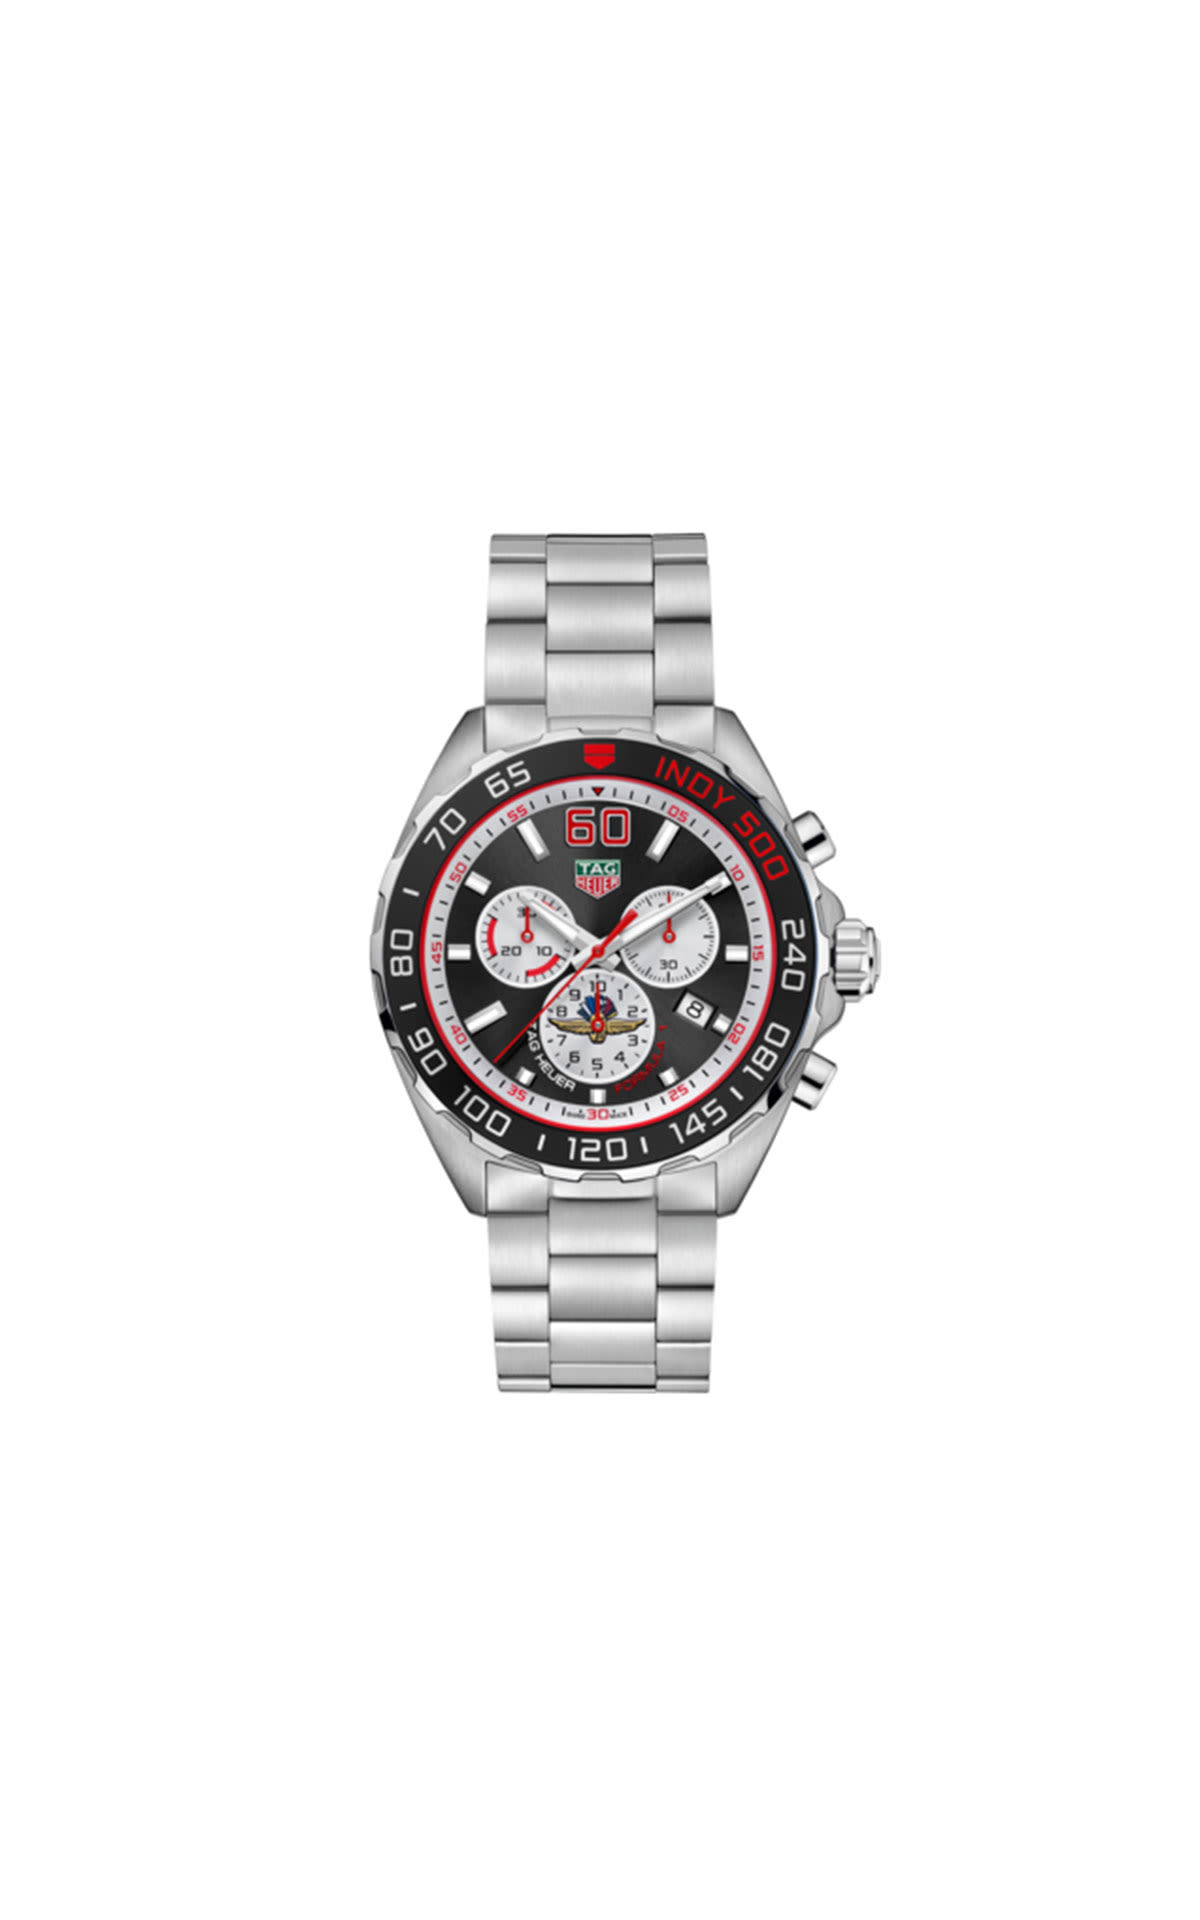 TAG Heuer Men’s Quartz Chronograph Formula 1 (Special Edition) from Bicester Village